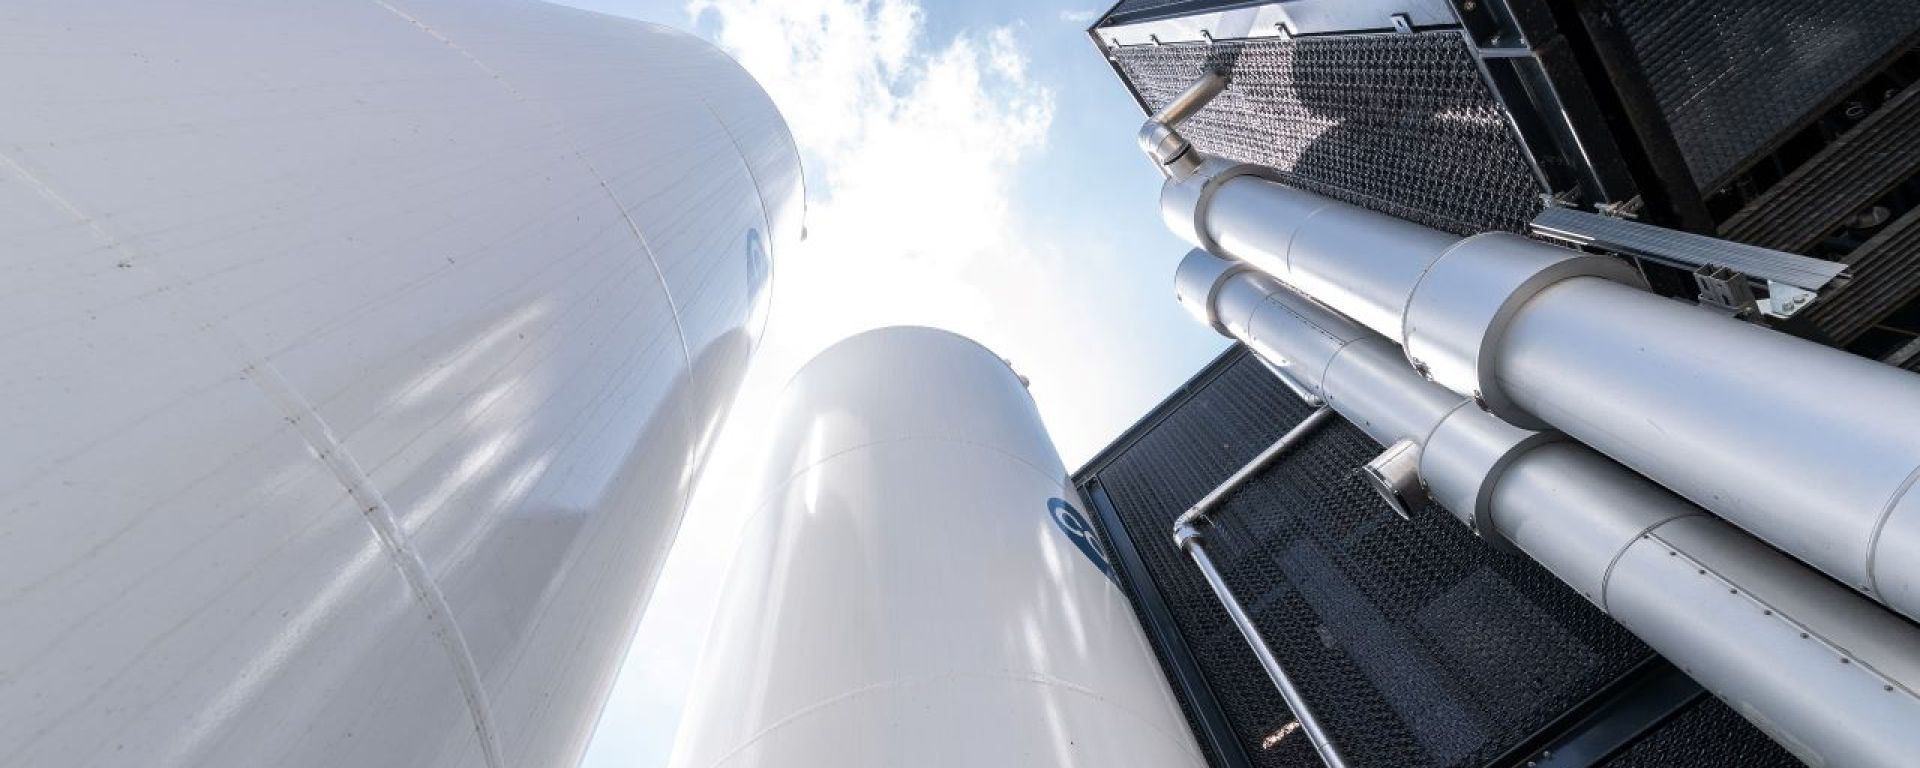 CO2 Energie AG, South Pole and Airfix launch largest biomass carbon removal and storage project in Switzerland